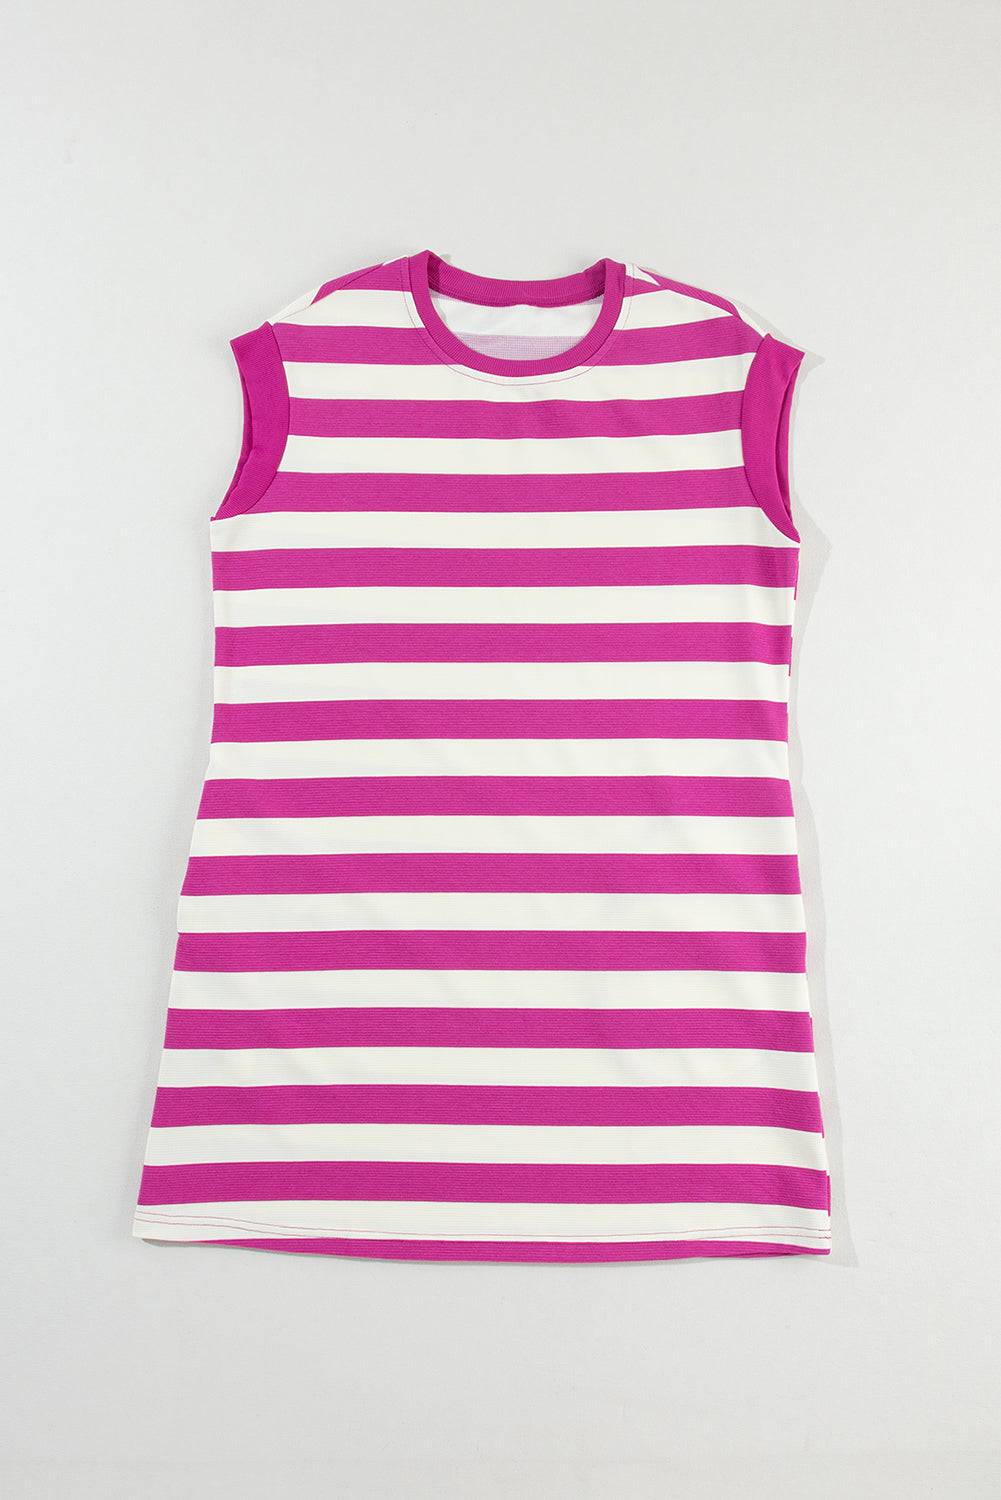 a pink and white striped top hanging on a wall